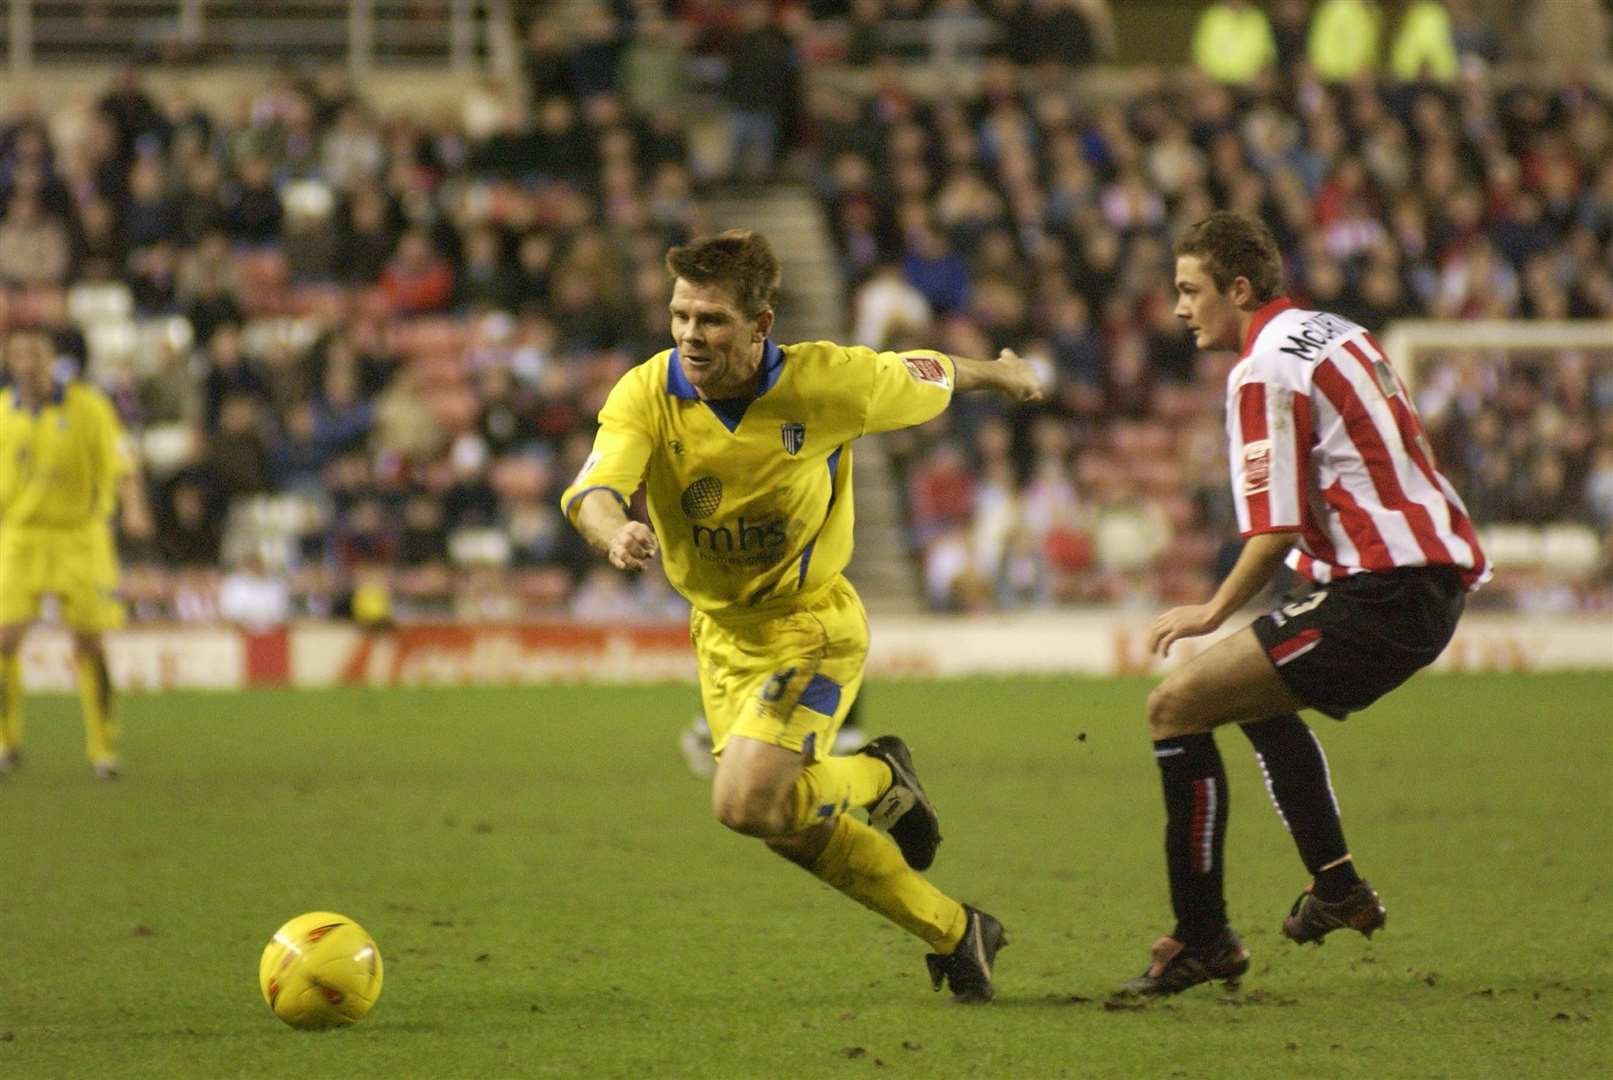 Andy Hessenthaler in action for the Gills on their last visit to Sunderland, in 2005